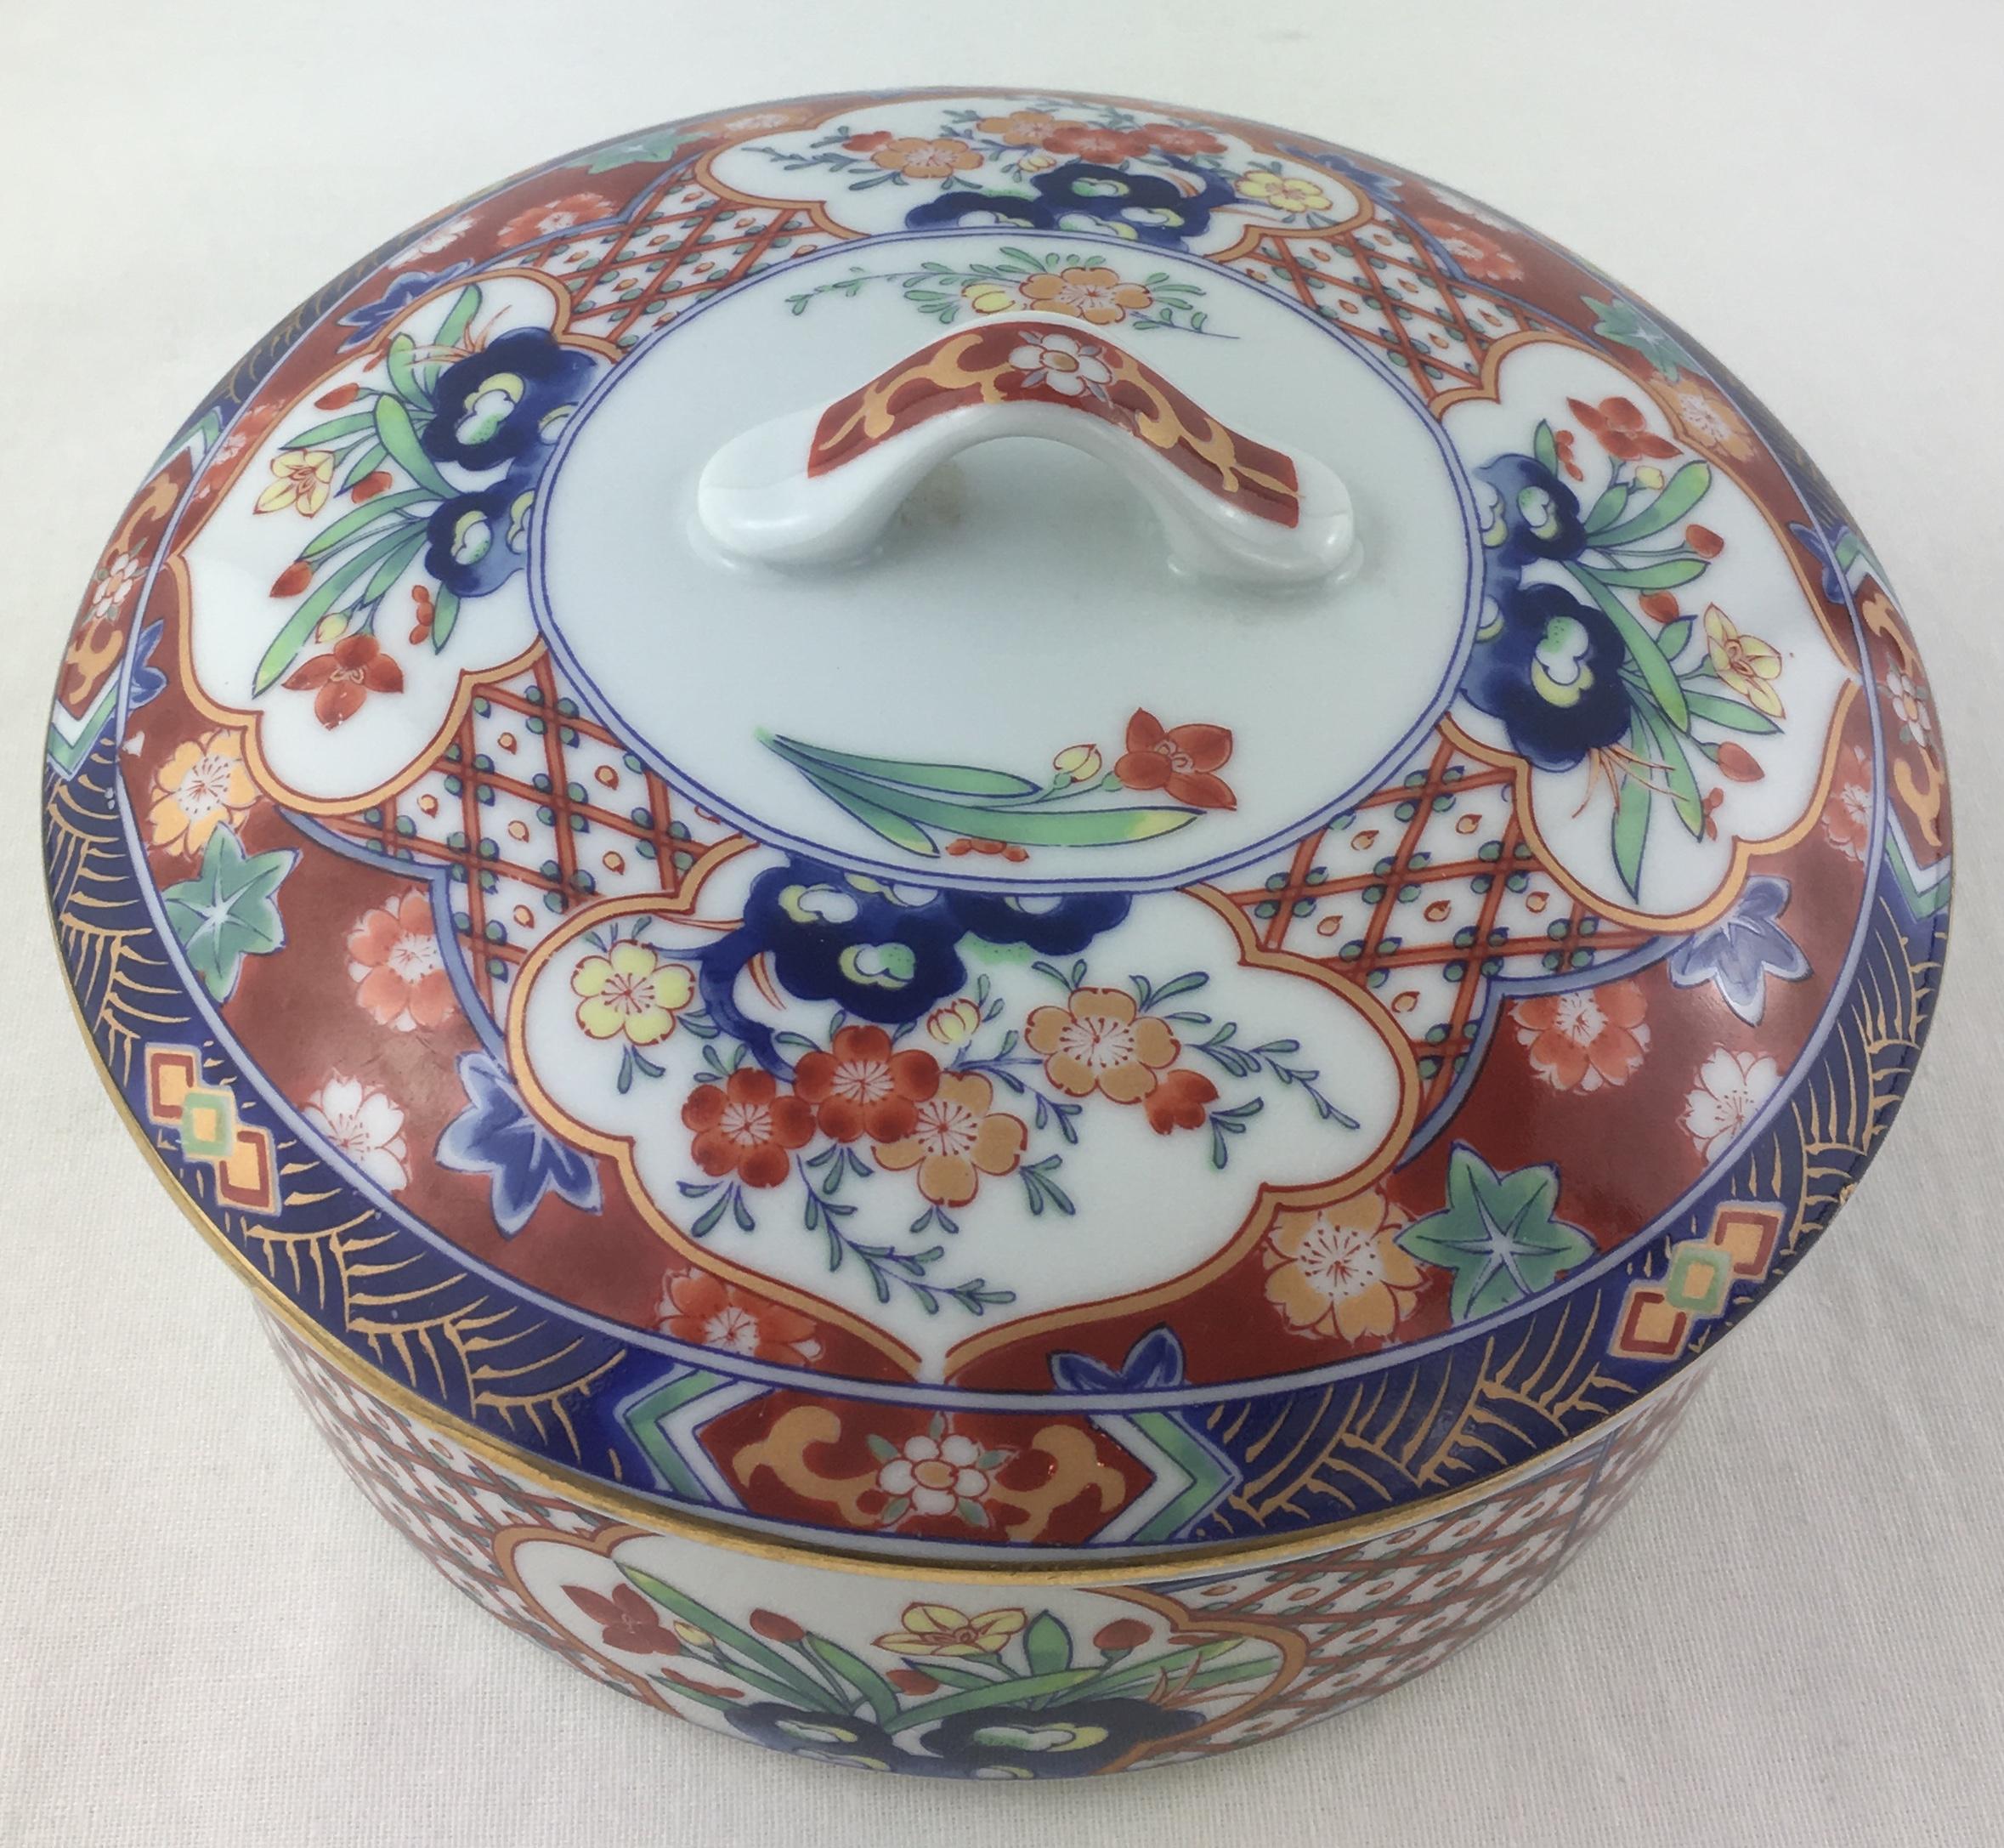 19th Century Japanese Hand-Painted Porcelain Lidded Serving Dish, Trinket or Jewelry Box For Sale